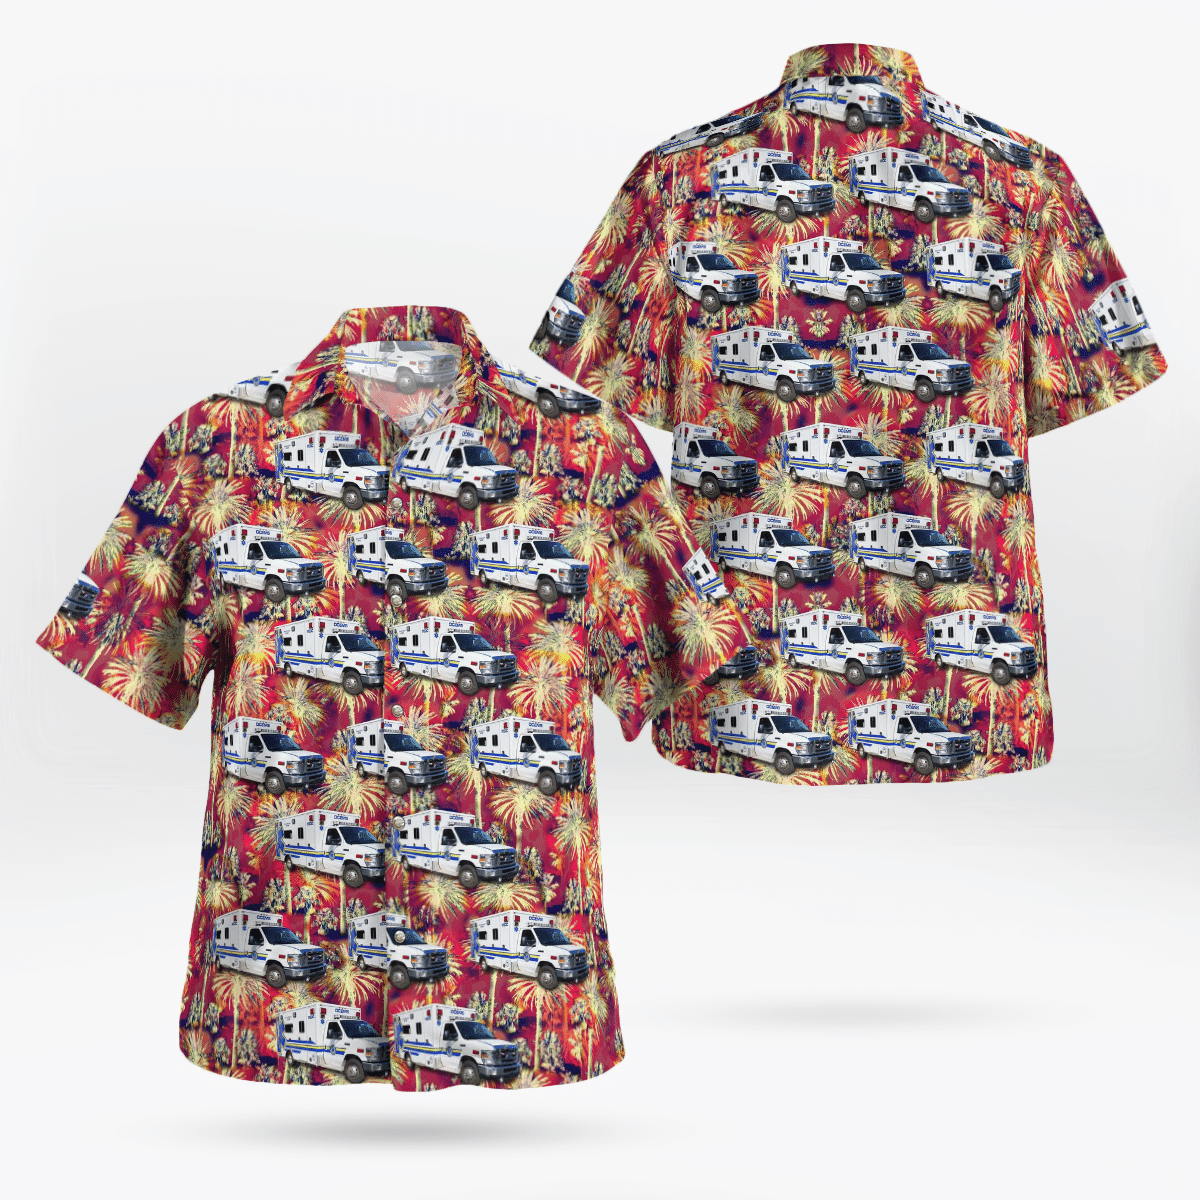 Top Hawaiian shirts are perfect for hot and humid days 177